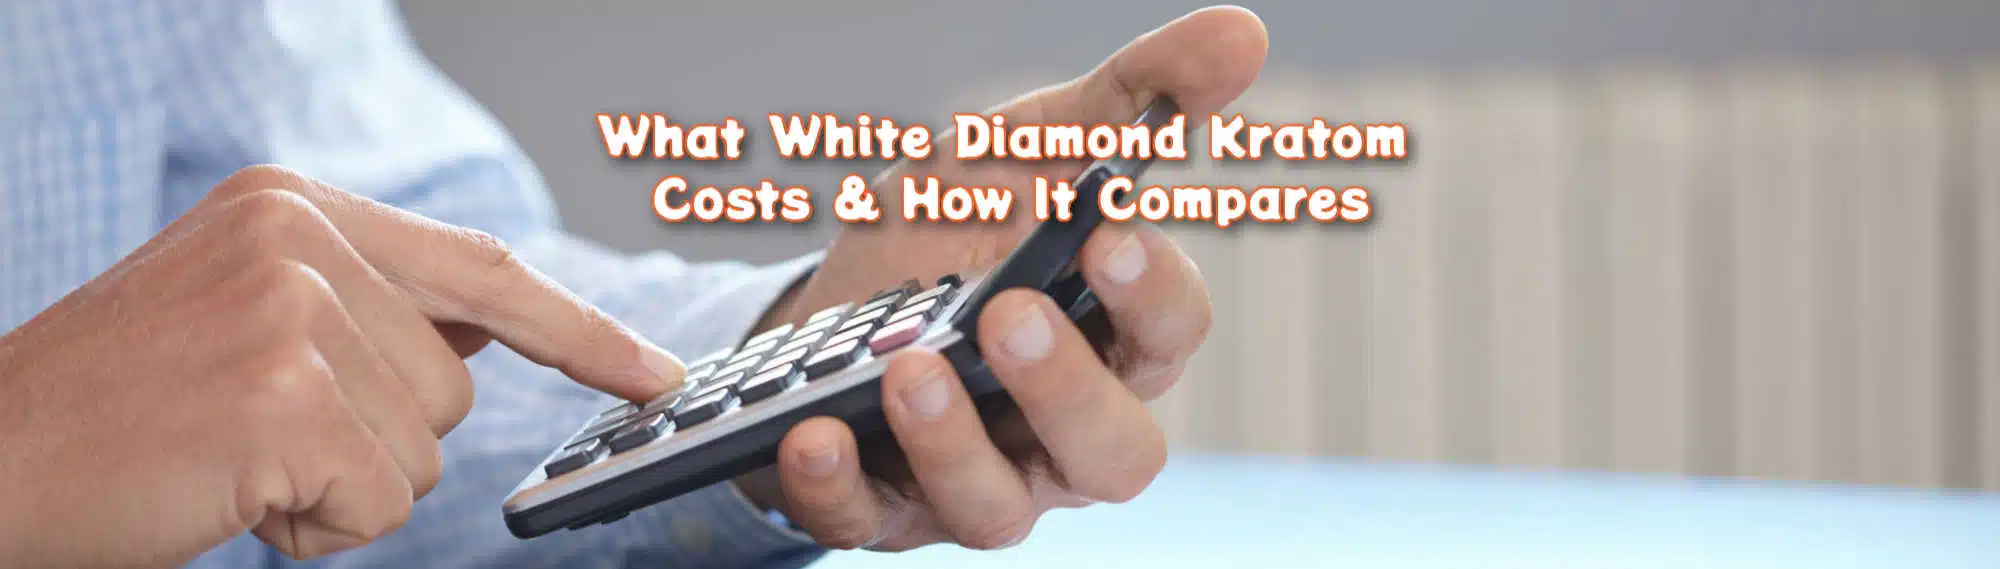 image of what white diamond kratom costs and how it compares